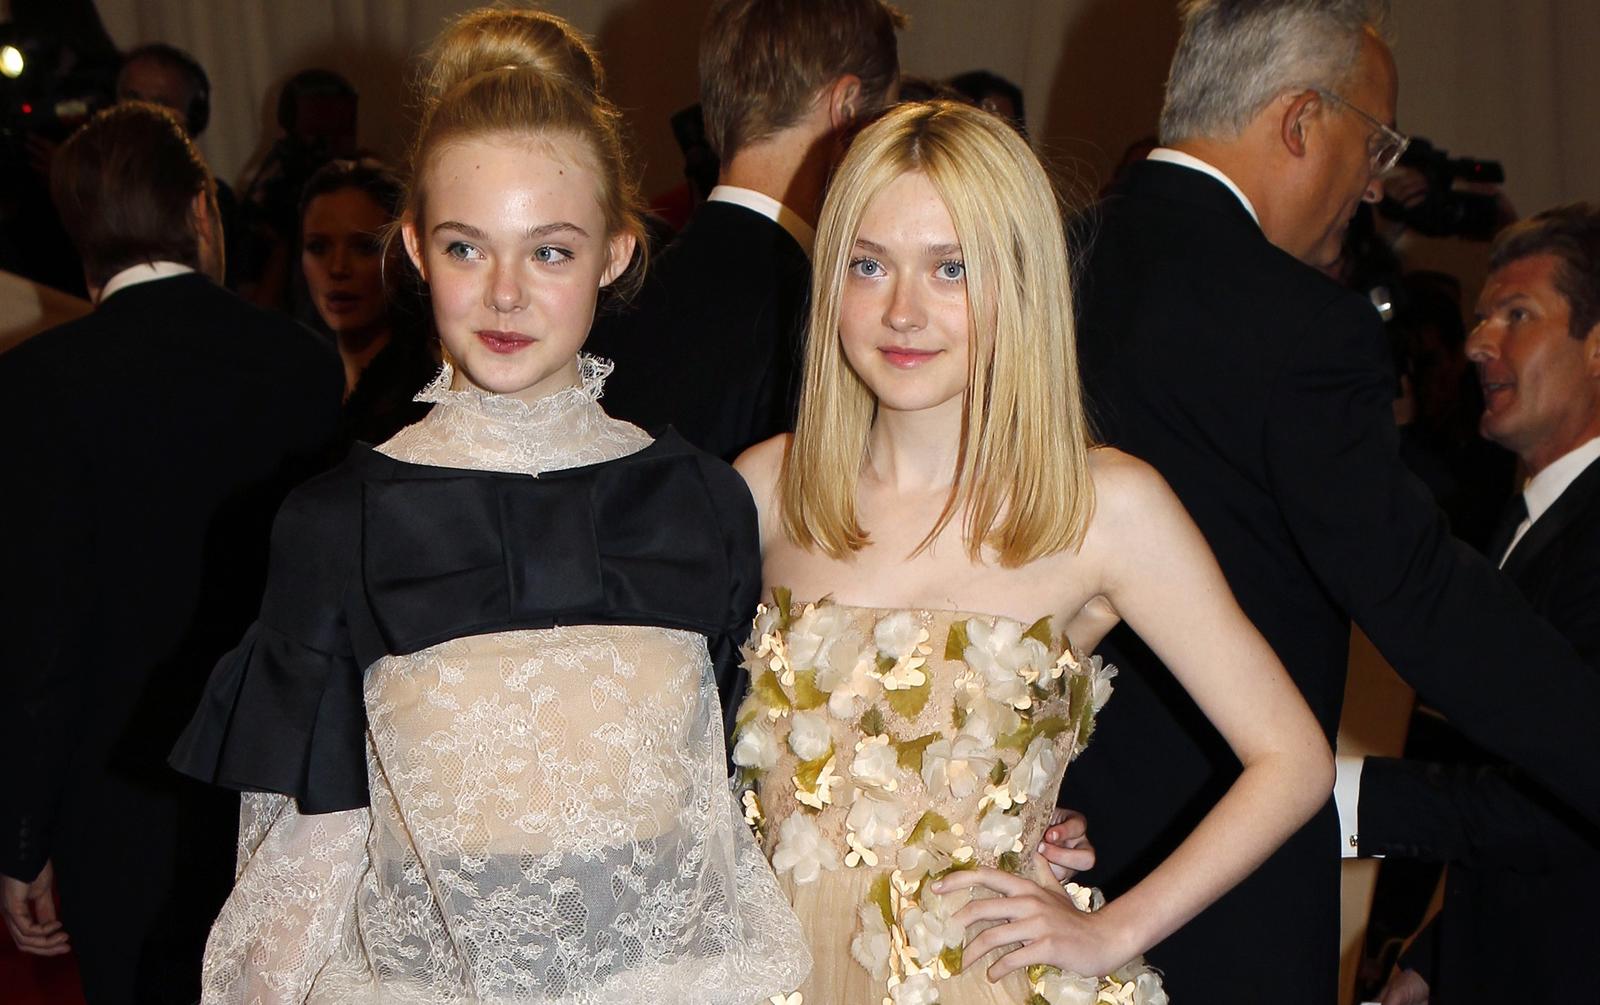 Elle Fanning and Dakota Fanning pose on arrival at the Metropolitan Museum of Art Costume Institute Benefit celebrating the opening of Alexander McQueen: Savage Beauty, in New York